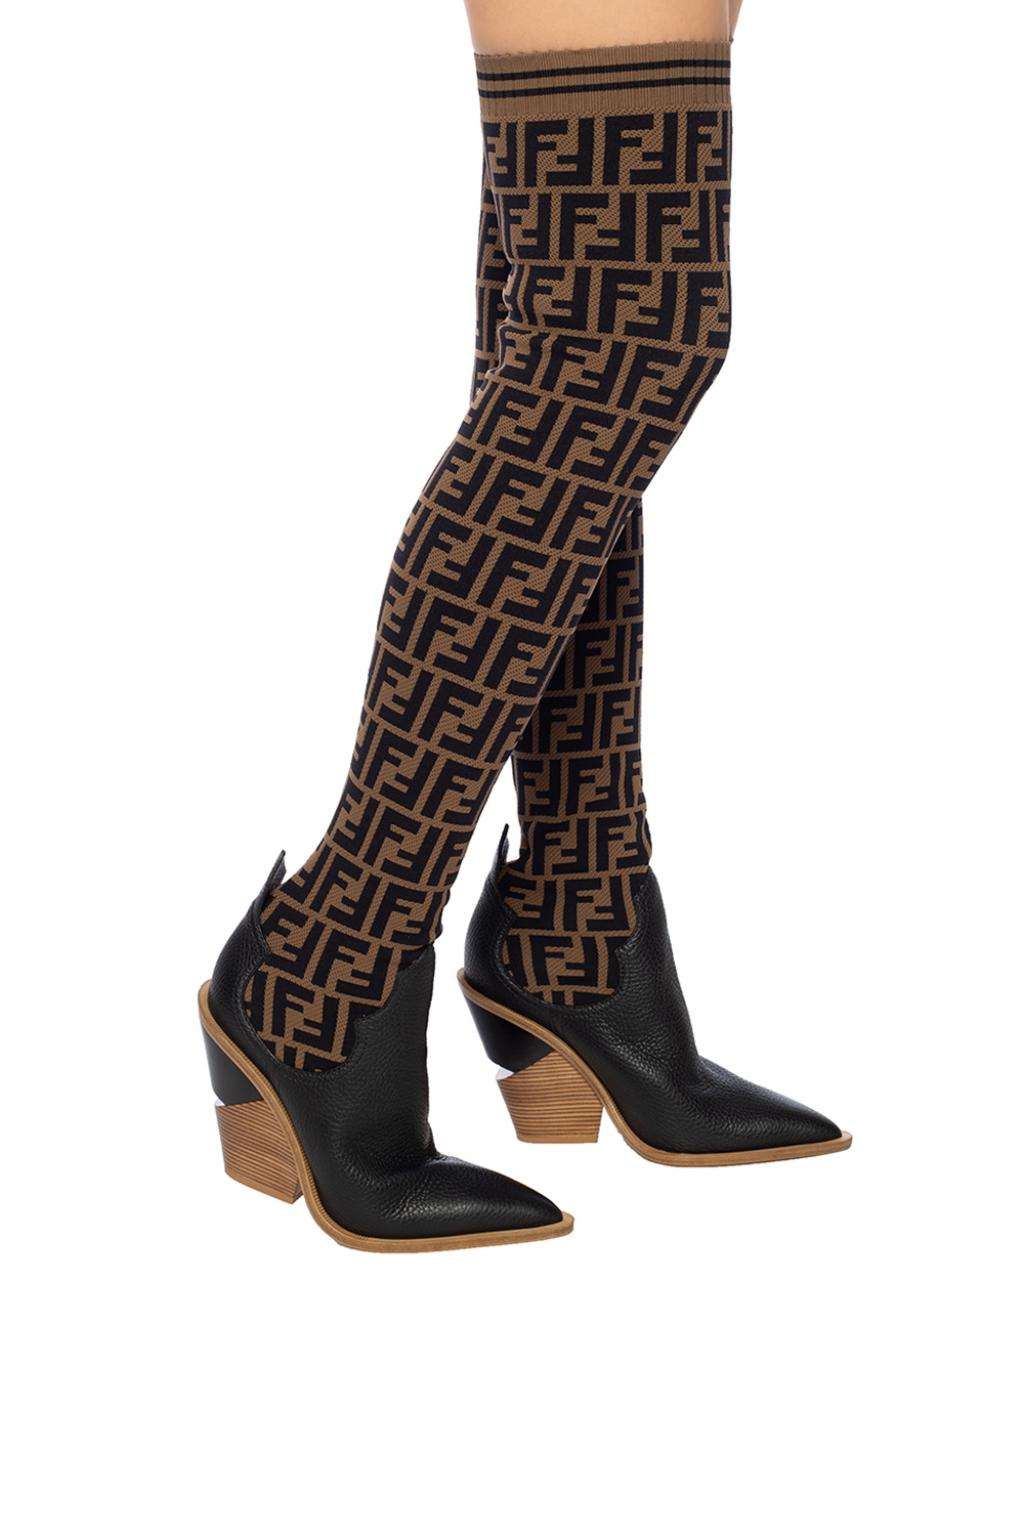 Fendi Thigh-high boots with sock | Women's Shoes | Vitkac